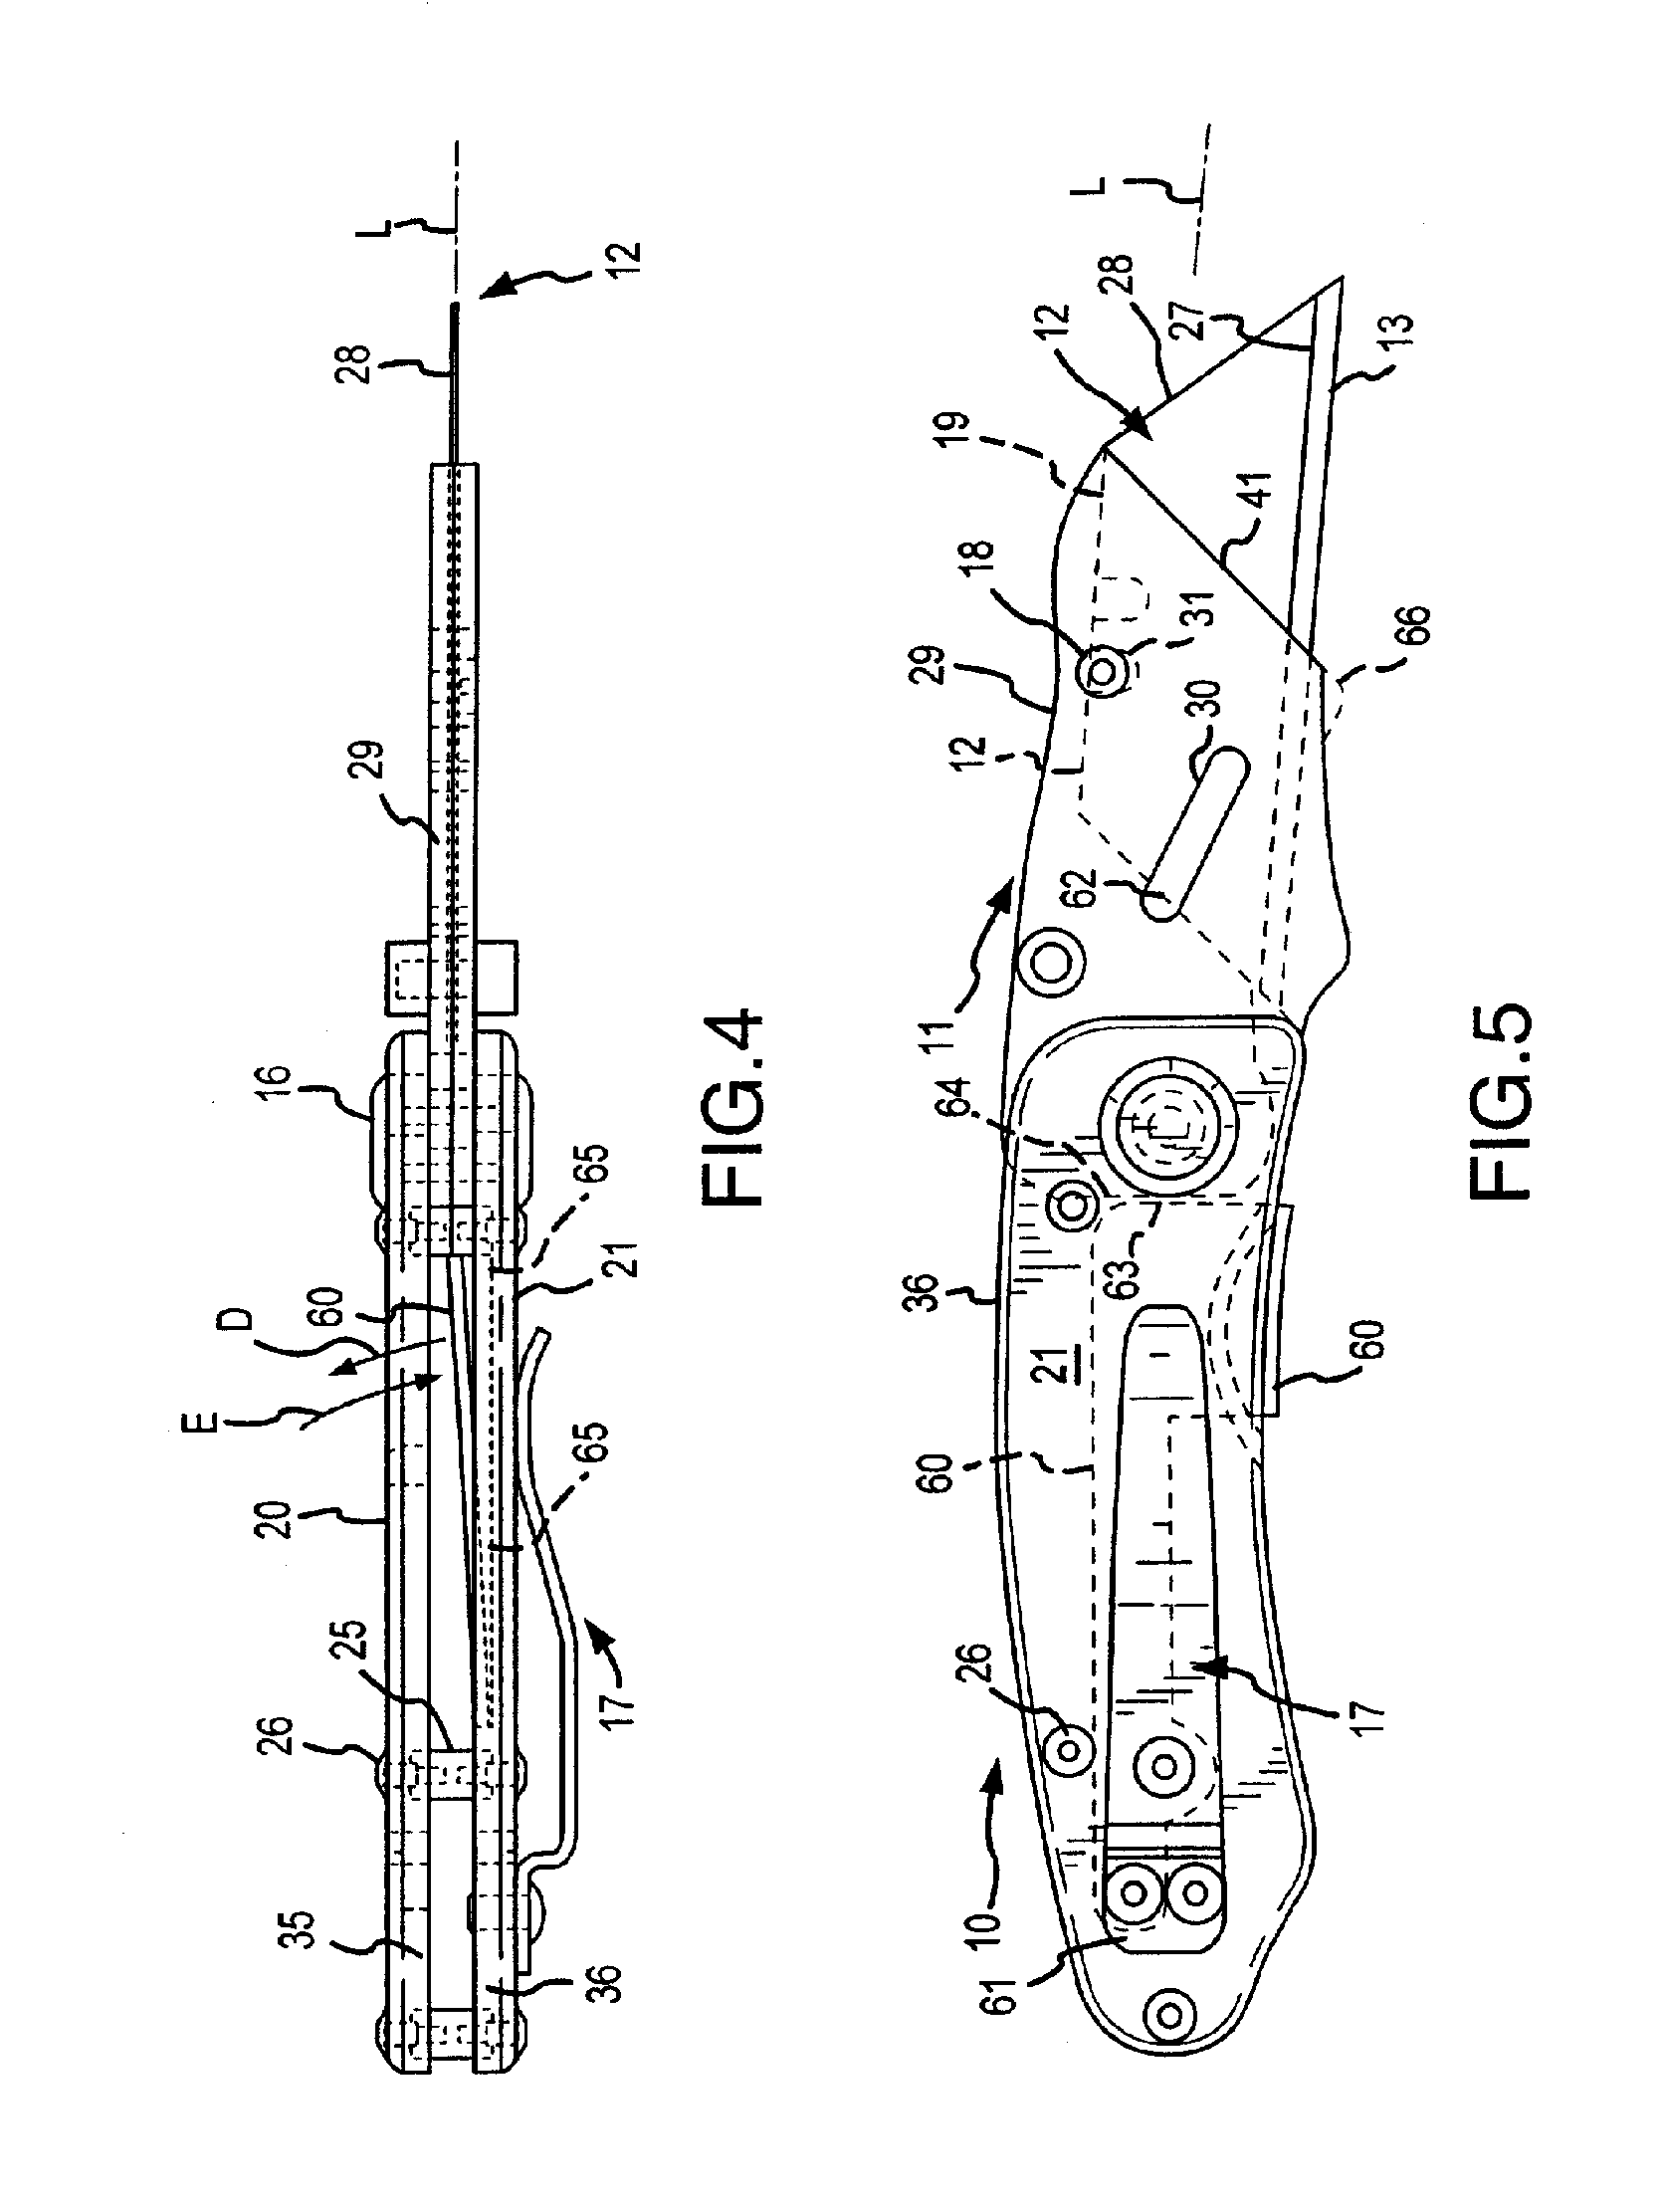 Pivoting securing device for a utility knife blade